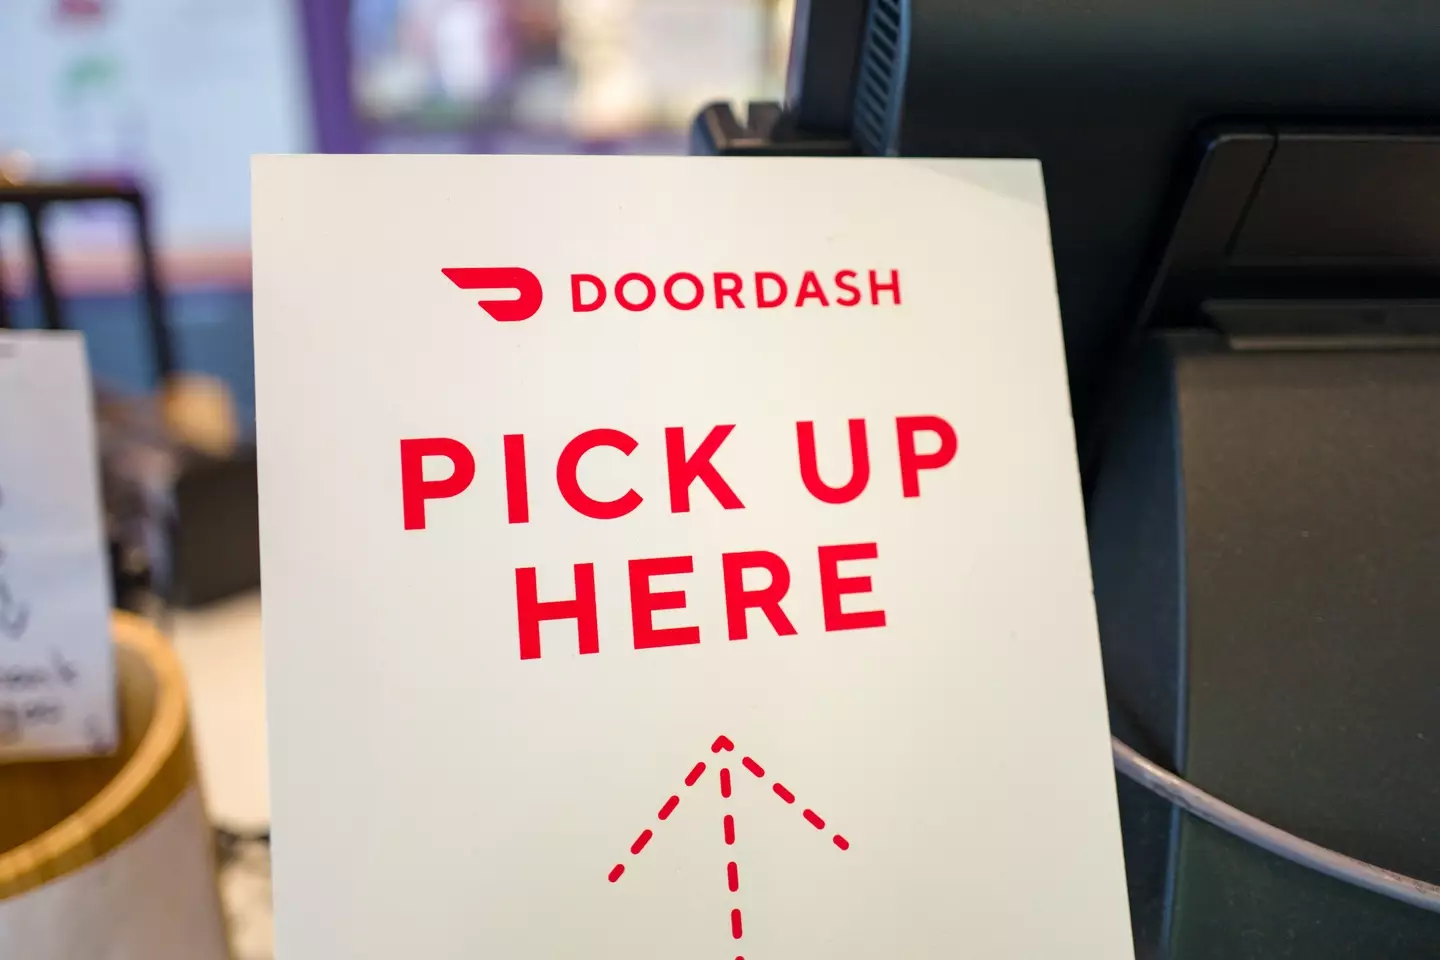 He gave some advice to people starting out on DoorDash.